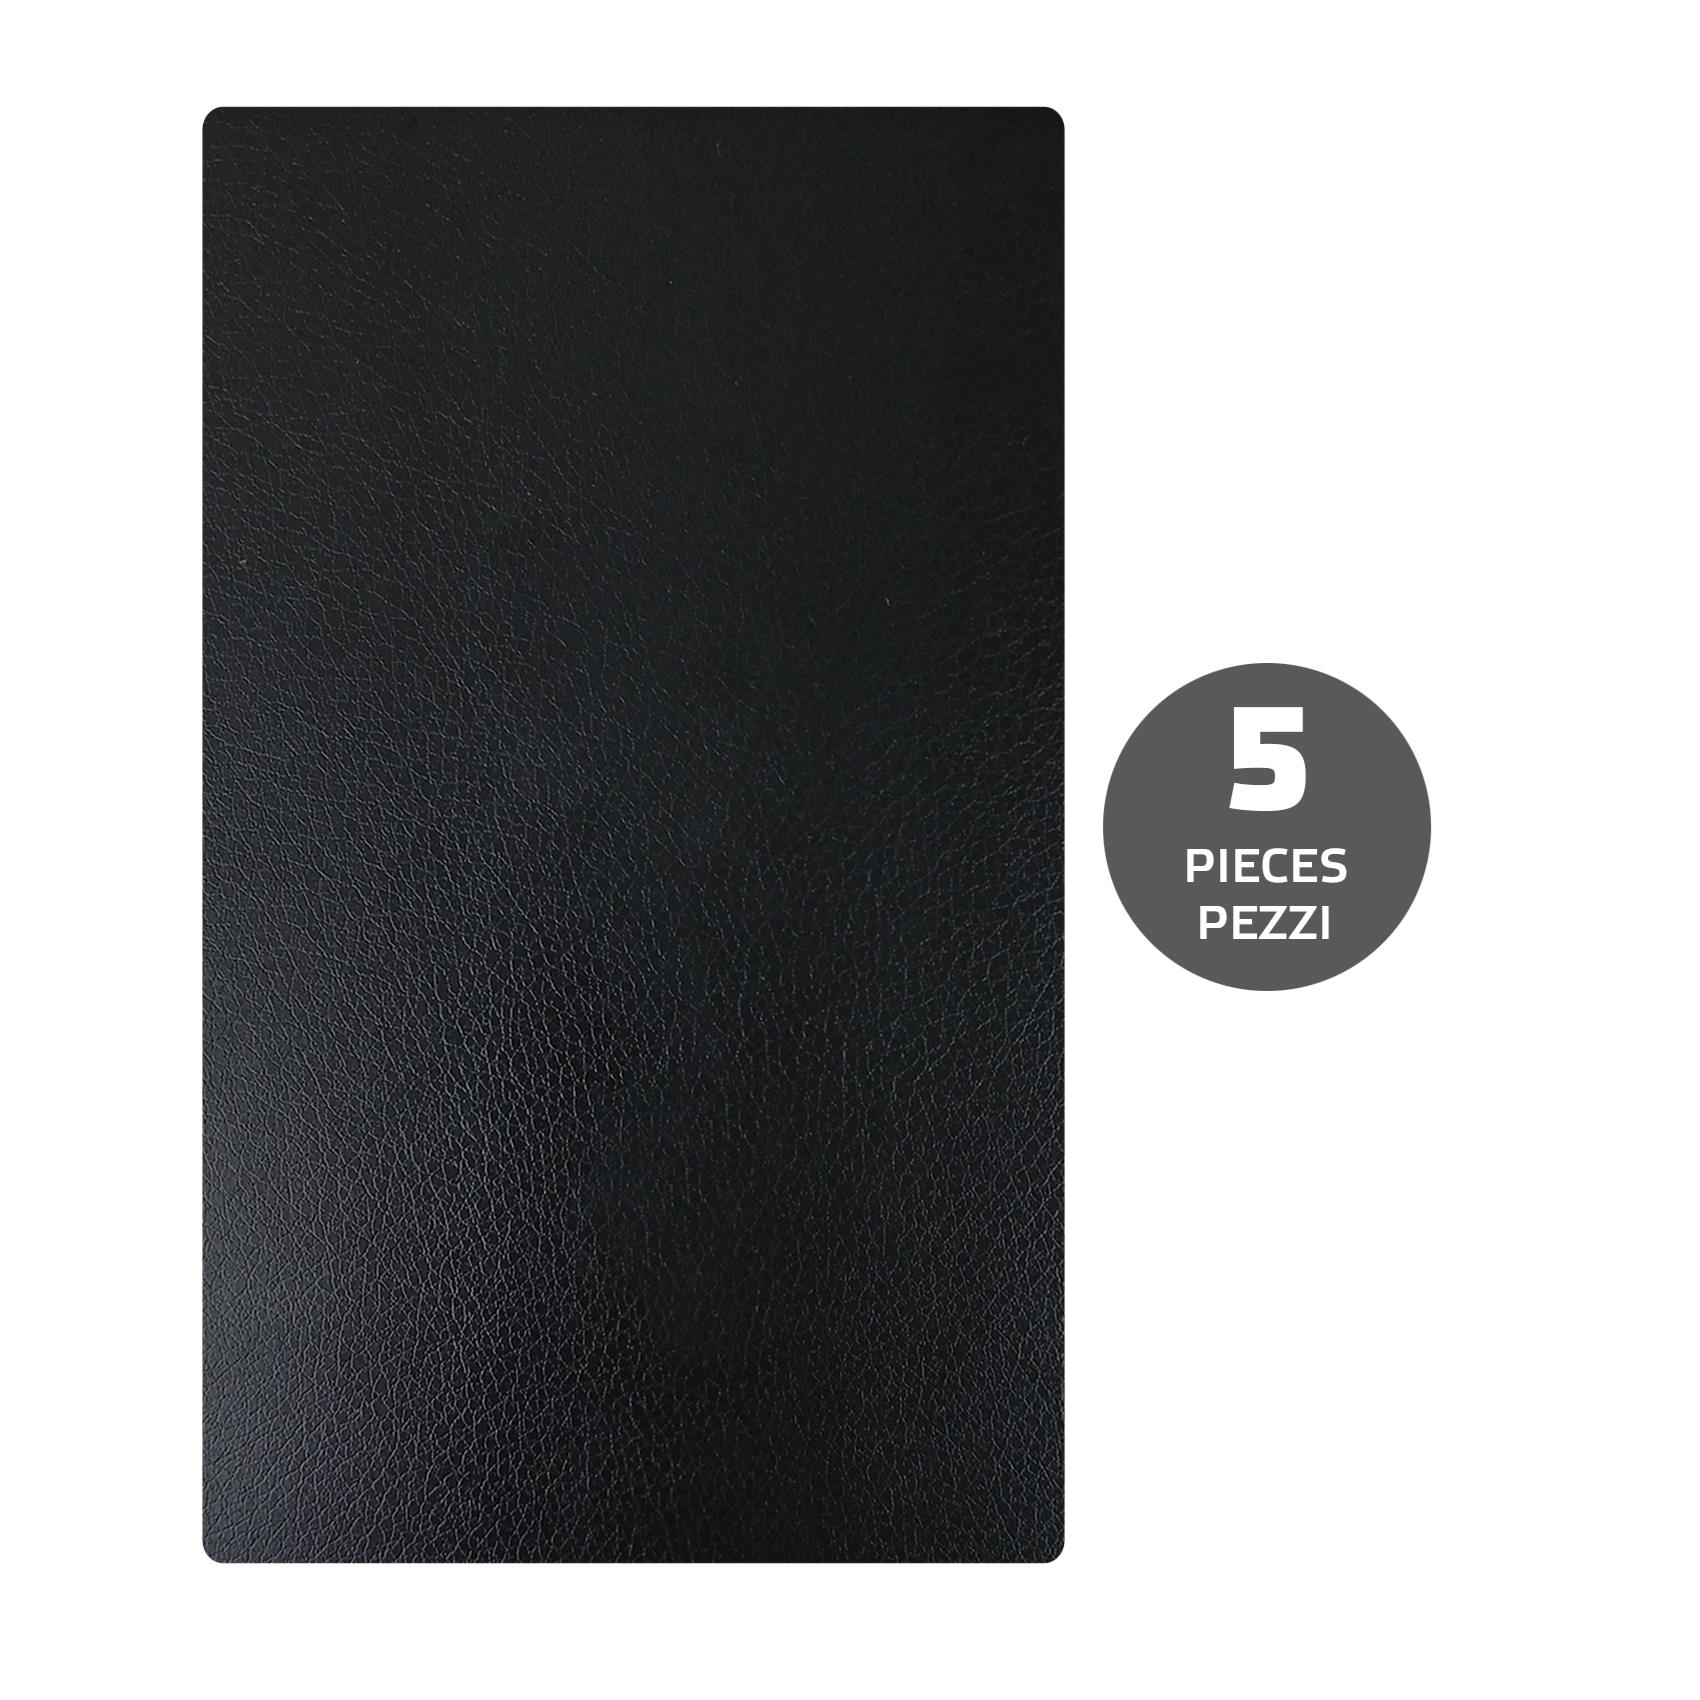 Image of CELLY PROSKIN FAUX LEATHER BLACK 5PZ PROSKIN5LEATHBK